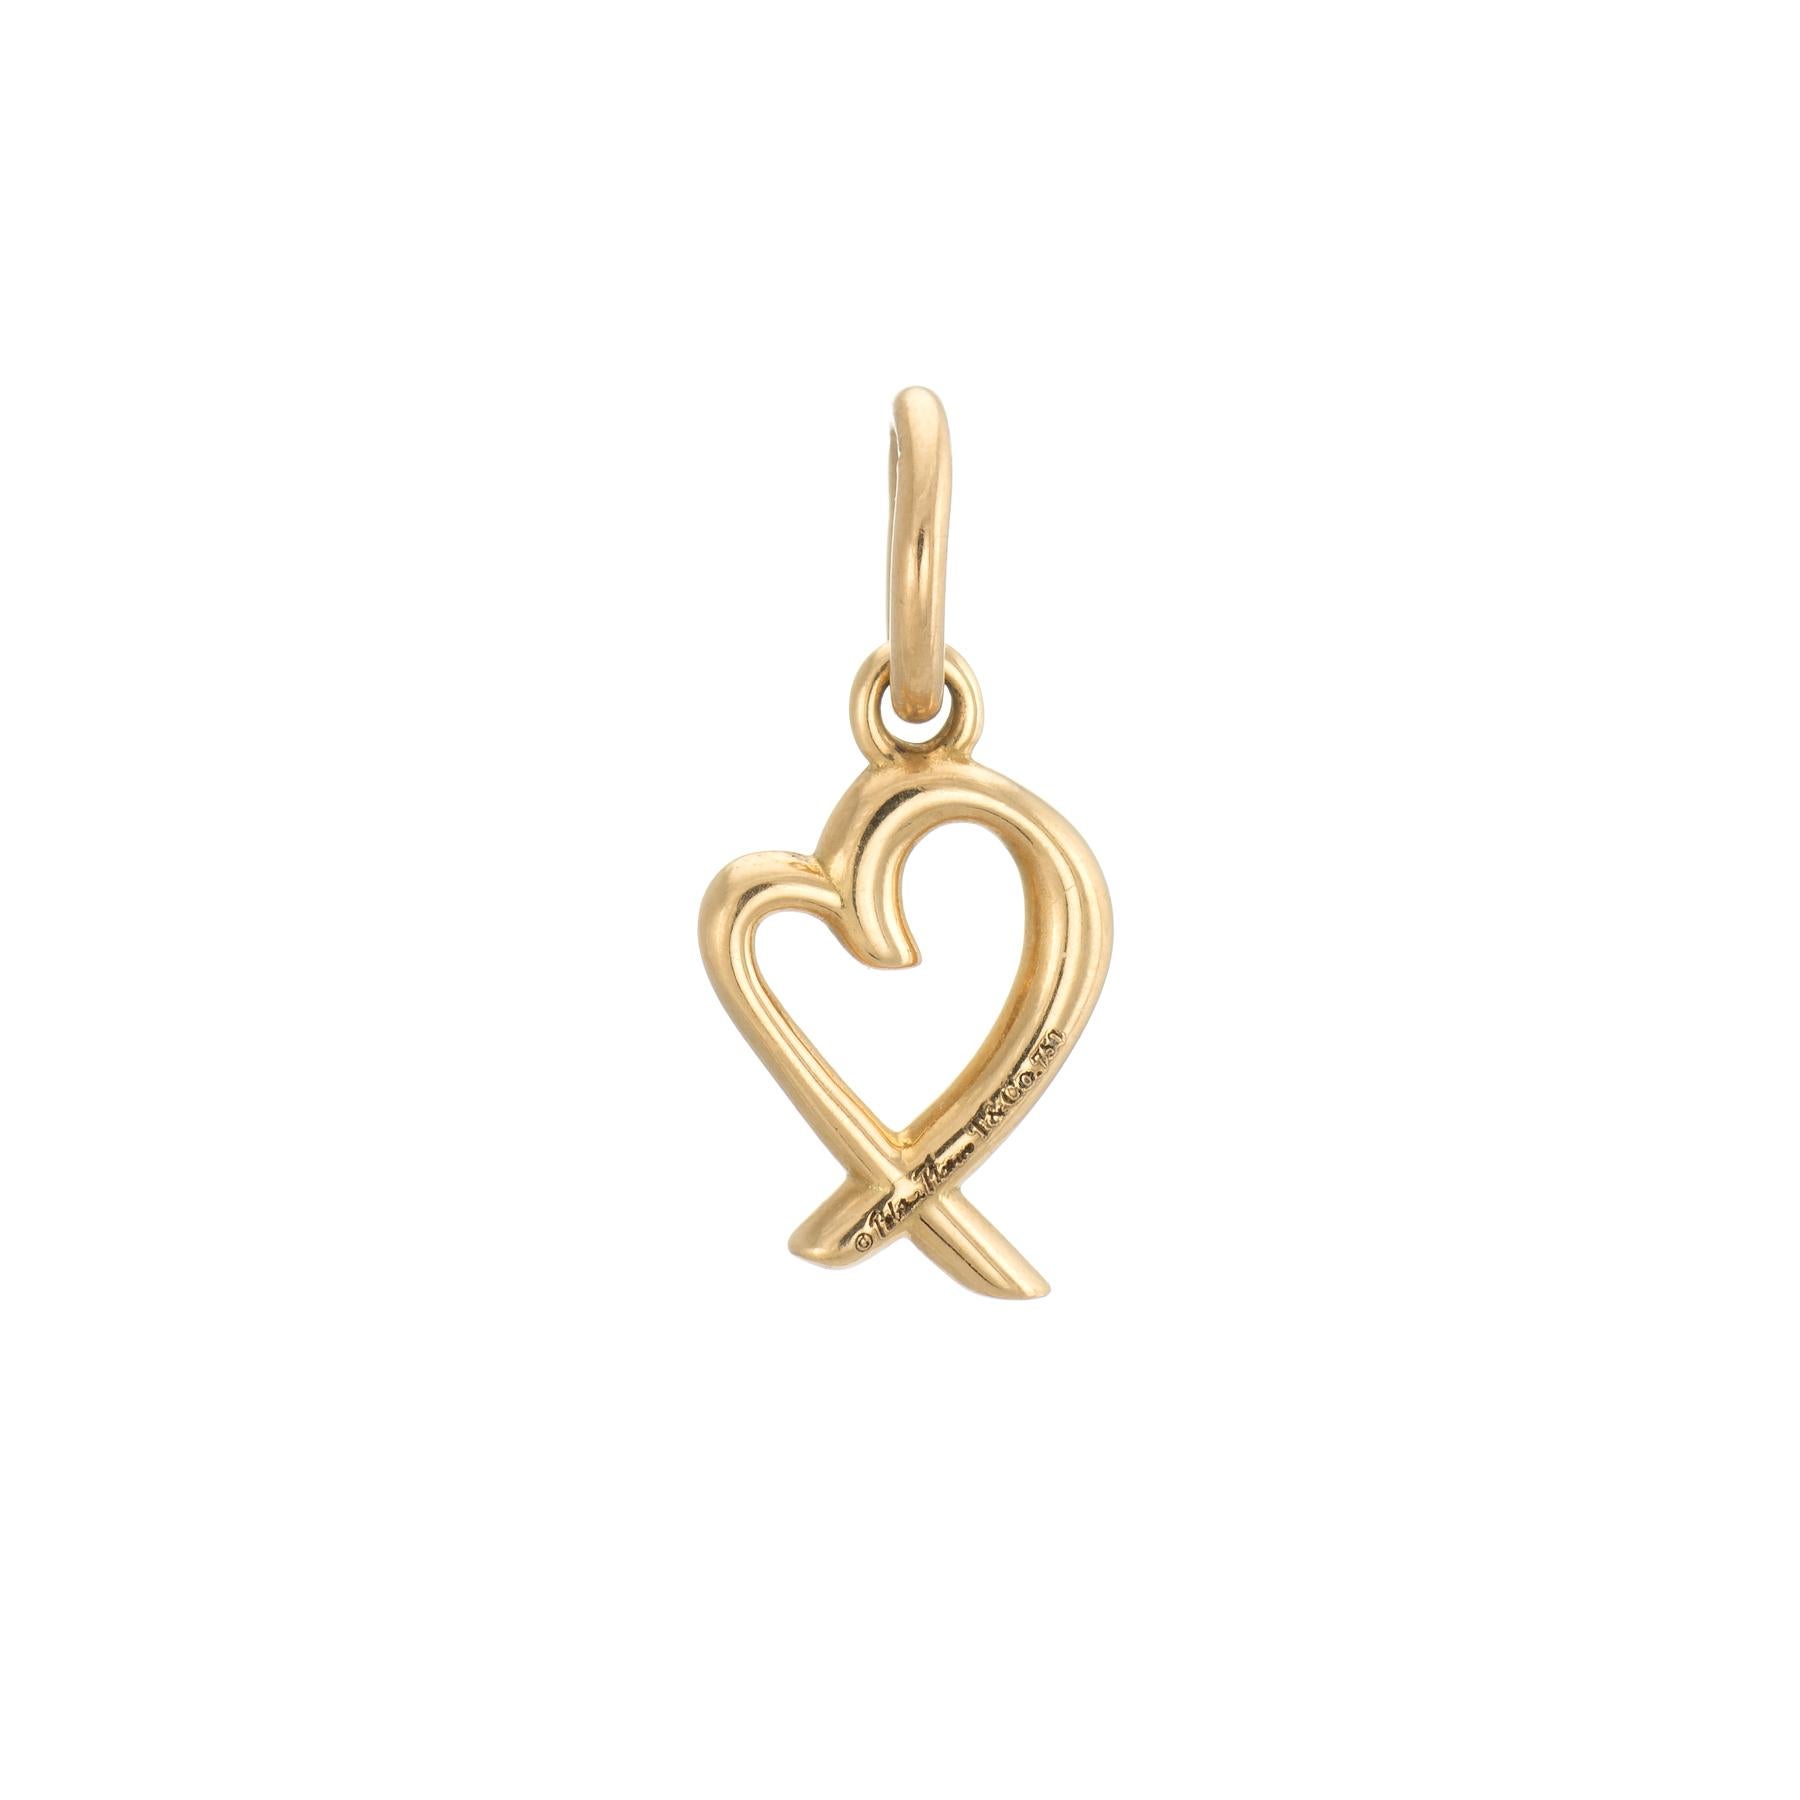 Elegant and finely detailed pre-owned Tiffany & Co 18k gold loving heart charm.  

The small heart charm (3/4 x 1/4 inch) is designed by Paloma Picasso. Ideal for wear as a charm on a bracelet or as a pendant on a chain.

The charm is in very good